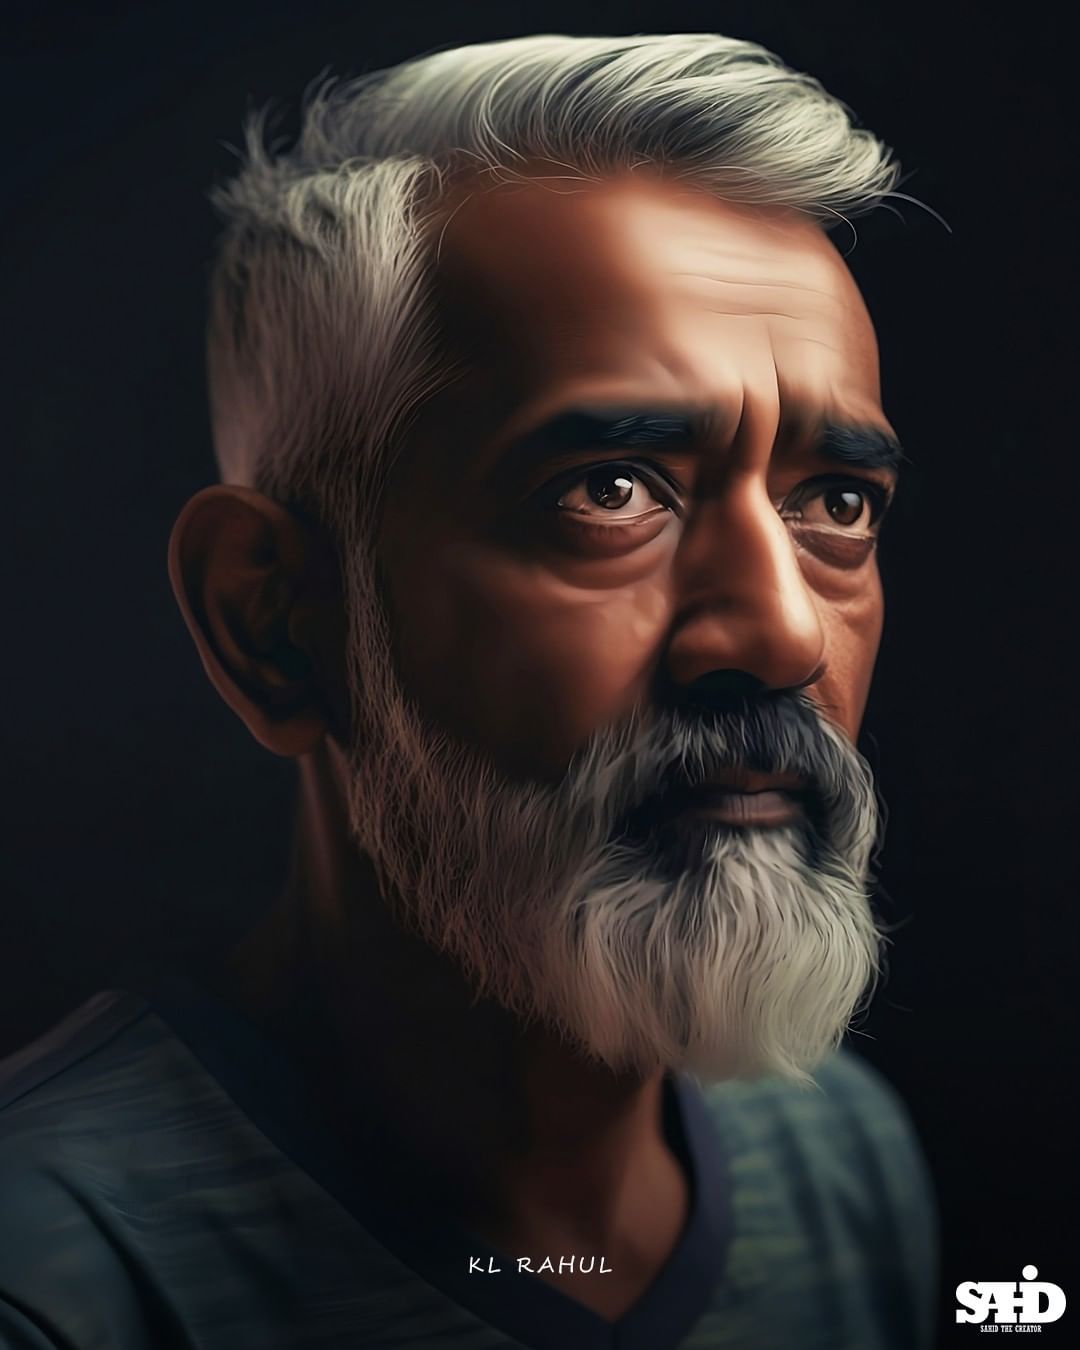 Ai Portrays Indian Cricketers As Elderly Men